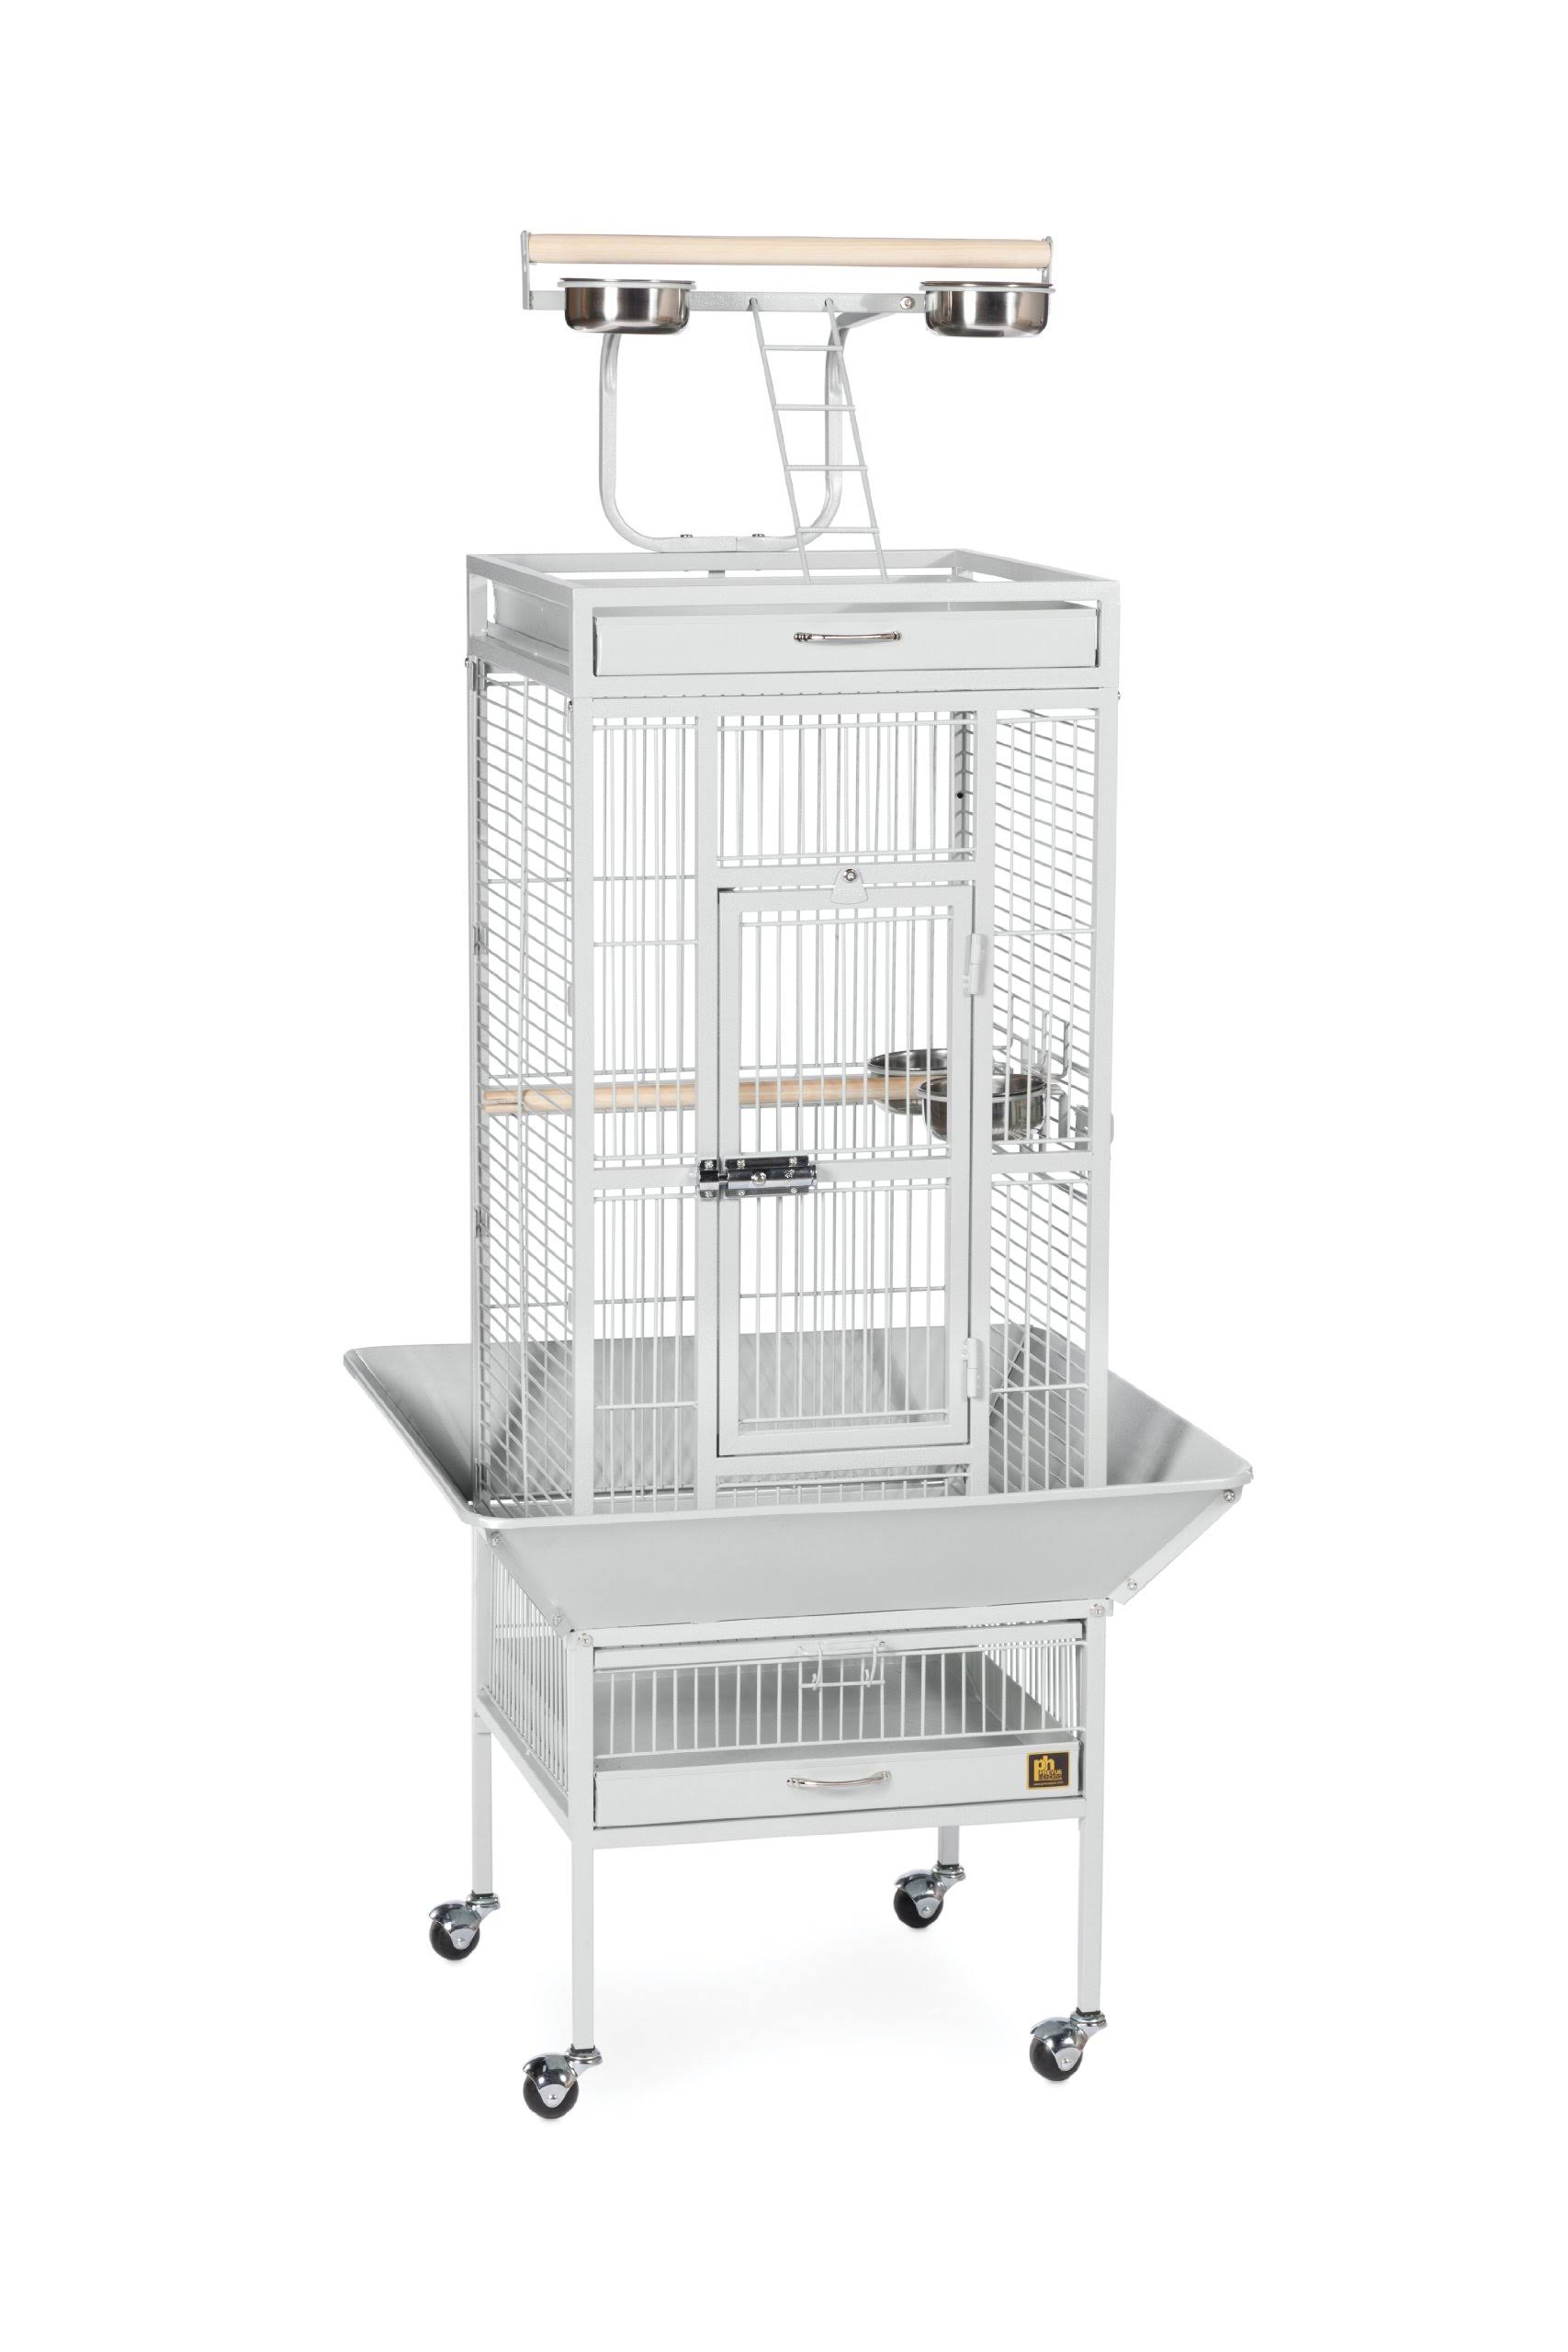 Prevue Hendryx 3151W Pet Products Wrought Iron Select Bird Cage - 18" x 18" x 57"